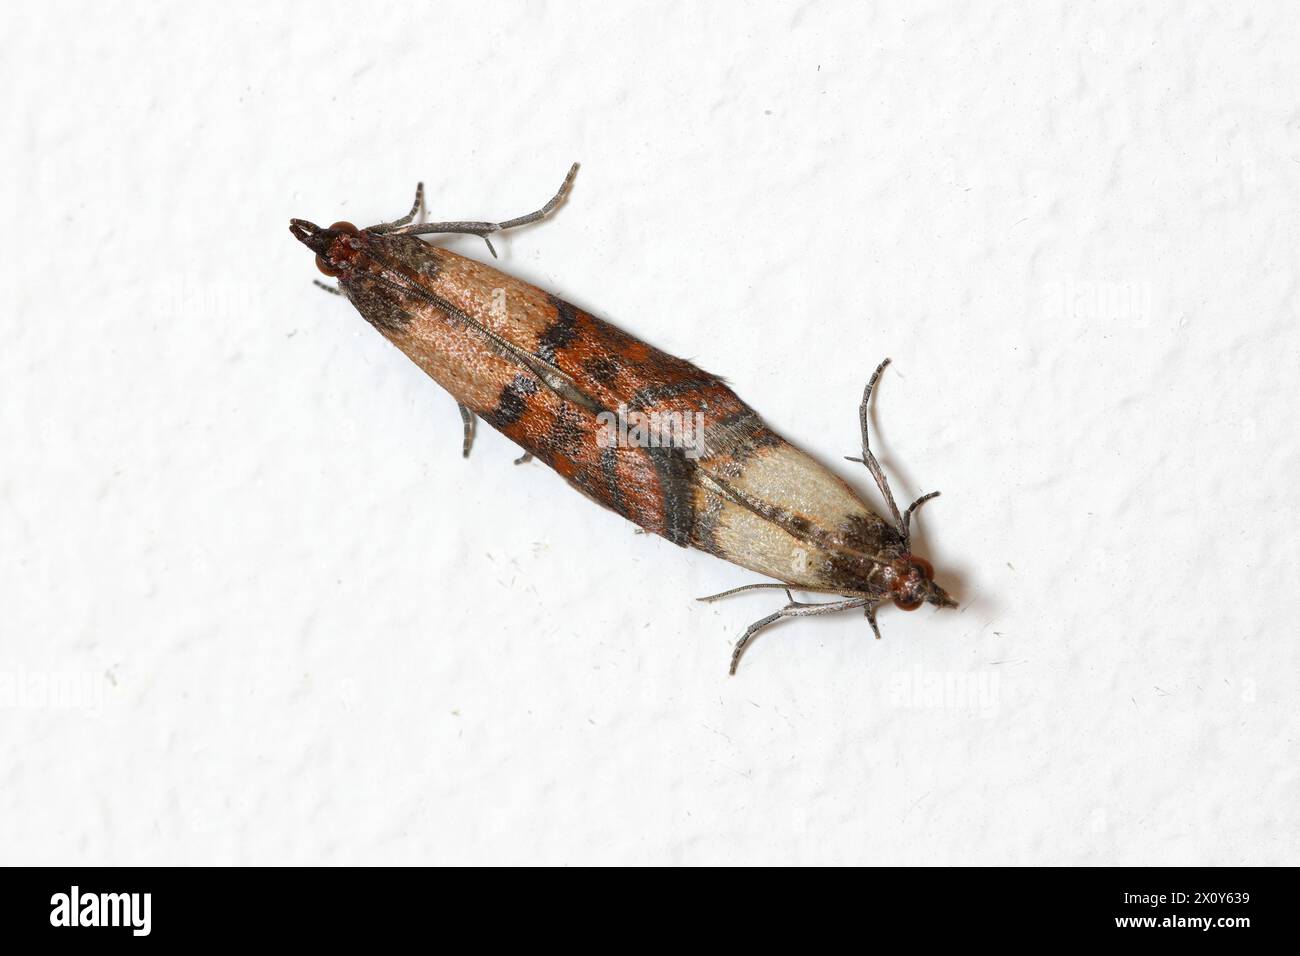 Indian meal moth or mealmoth (Plodia interpunctella) moth of storage pest on the wall at home. Stock Photo